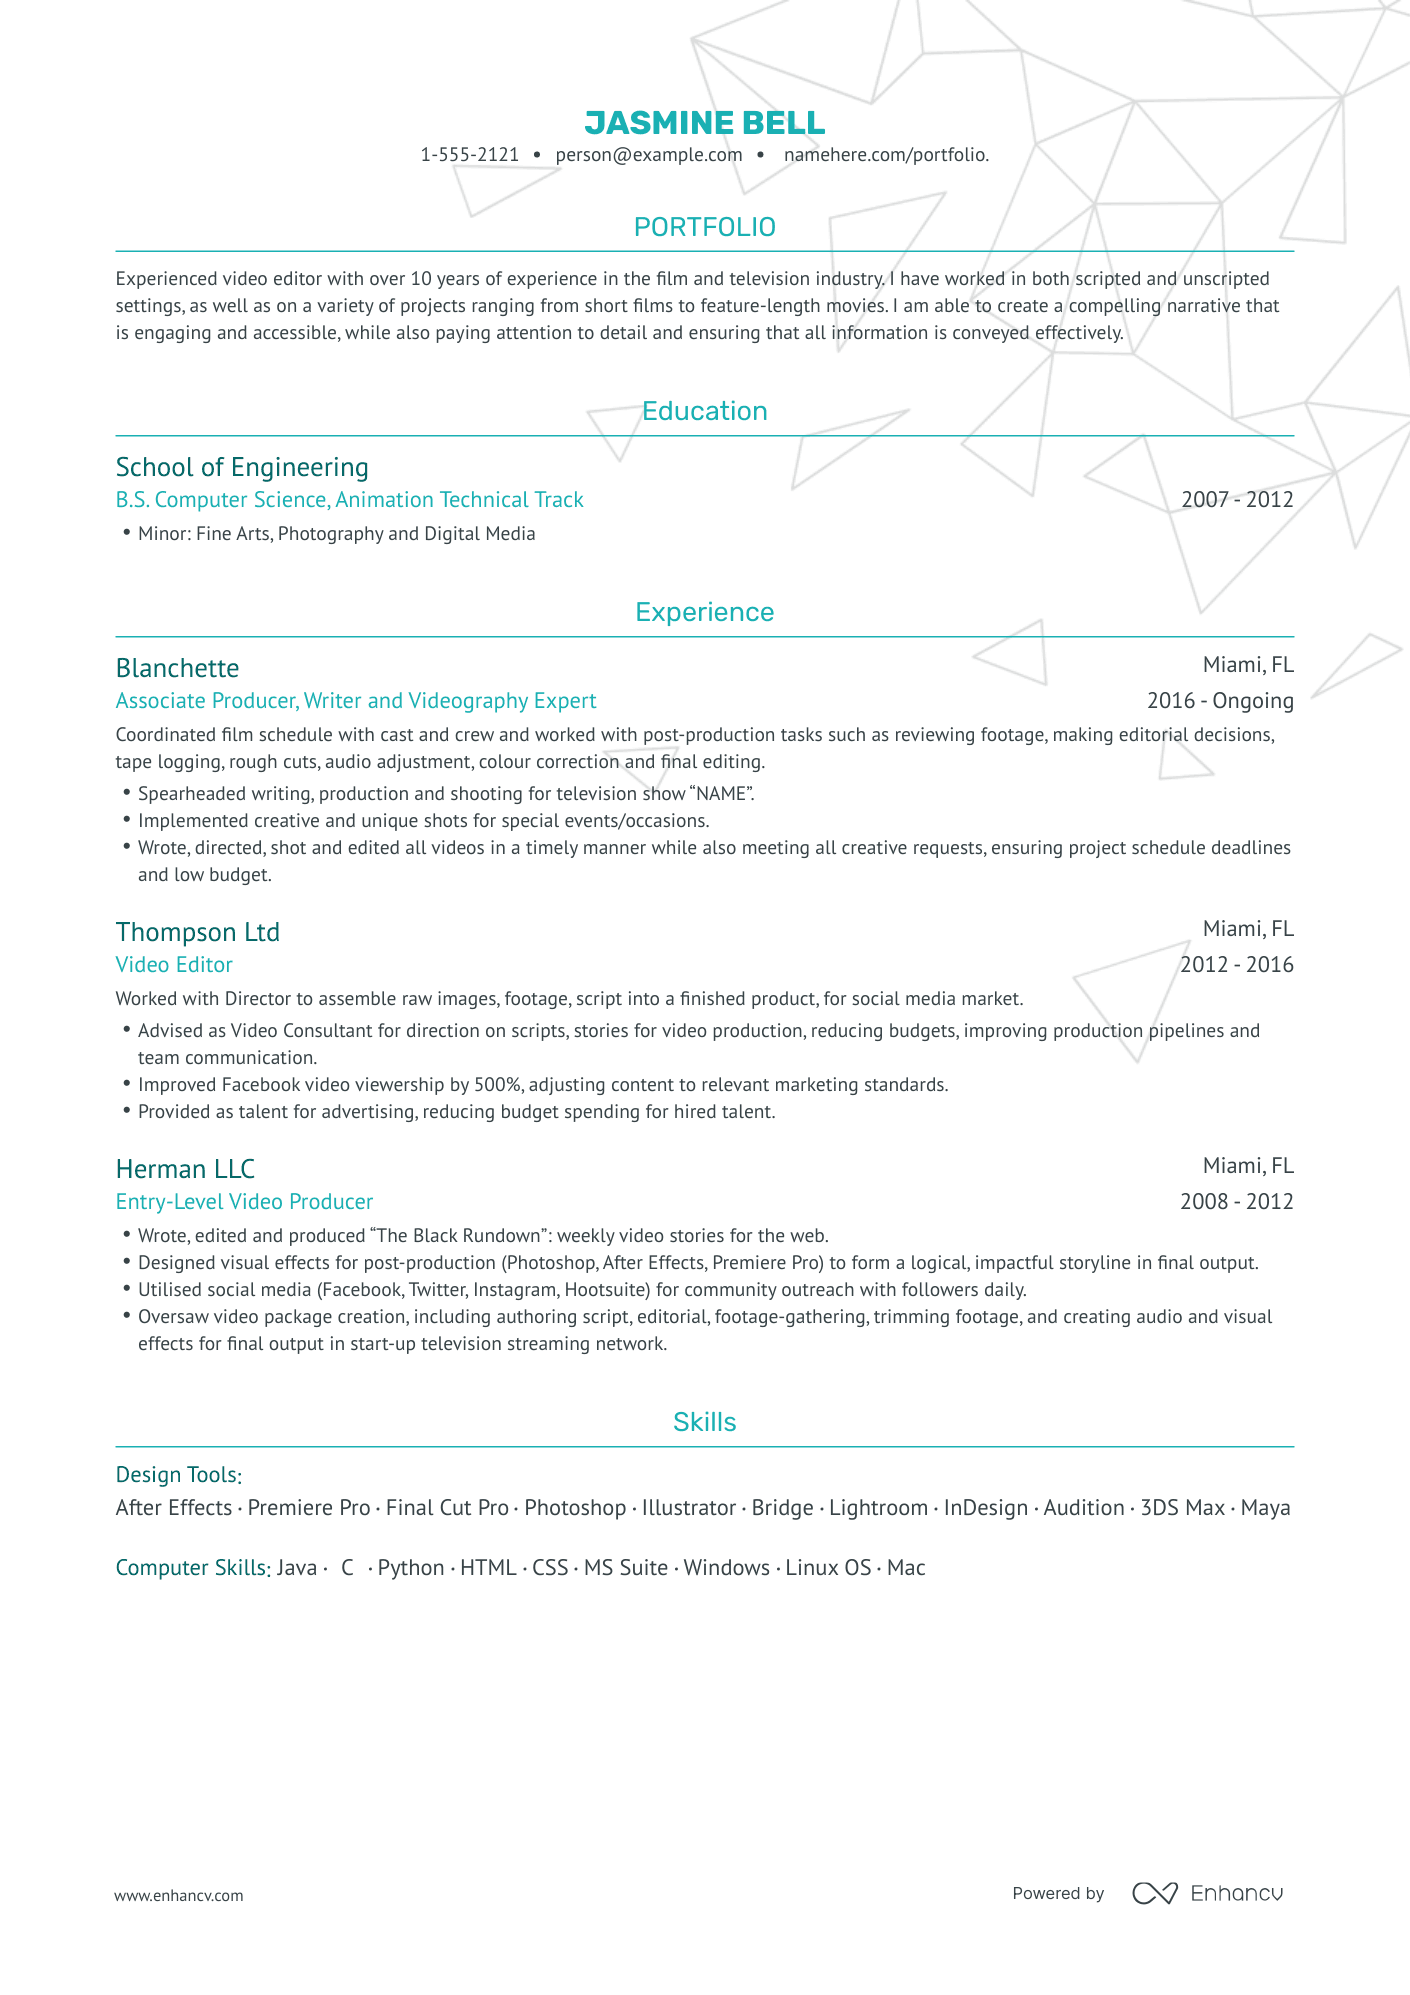 Traditional Video Editor Resume Template